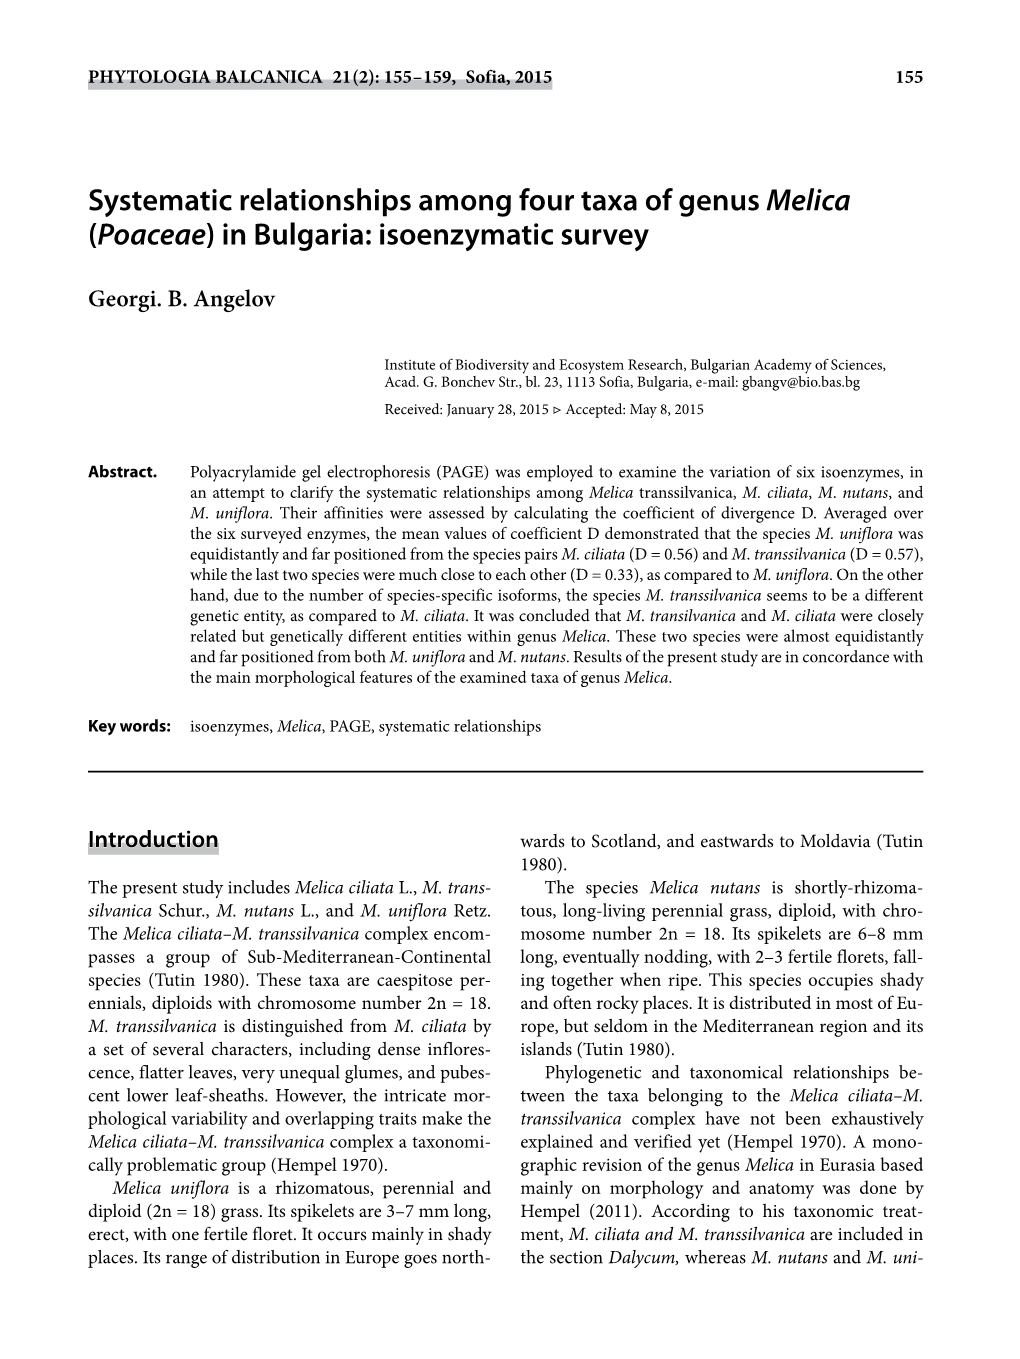 Systematic Relationships Among Four Taxa of Genus Melica (Poaceae) in Bulgaria: Isoenzymatic Survey